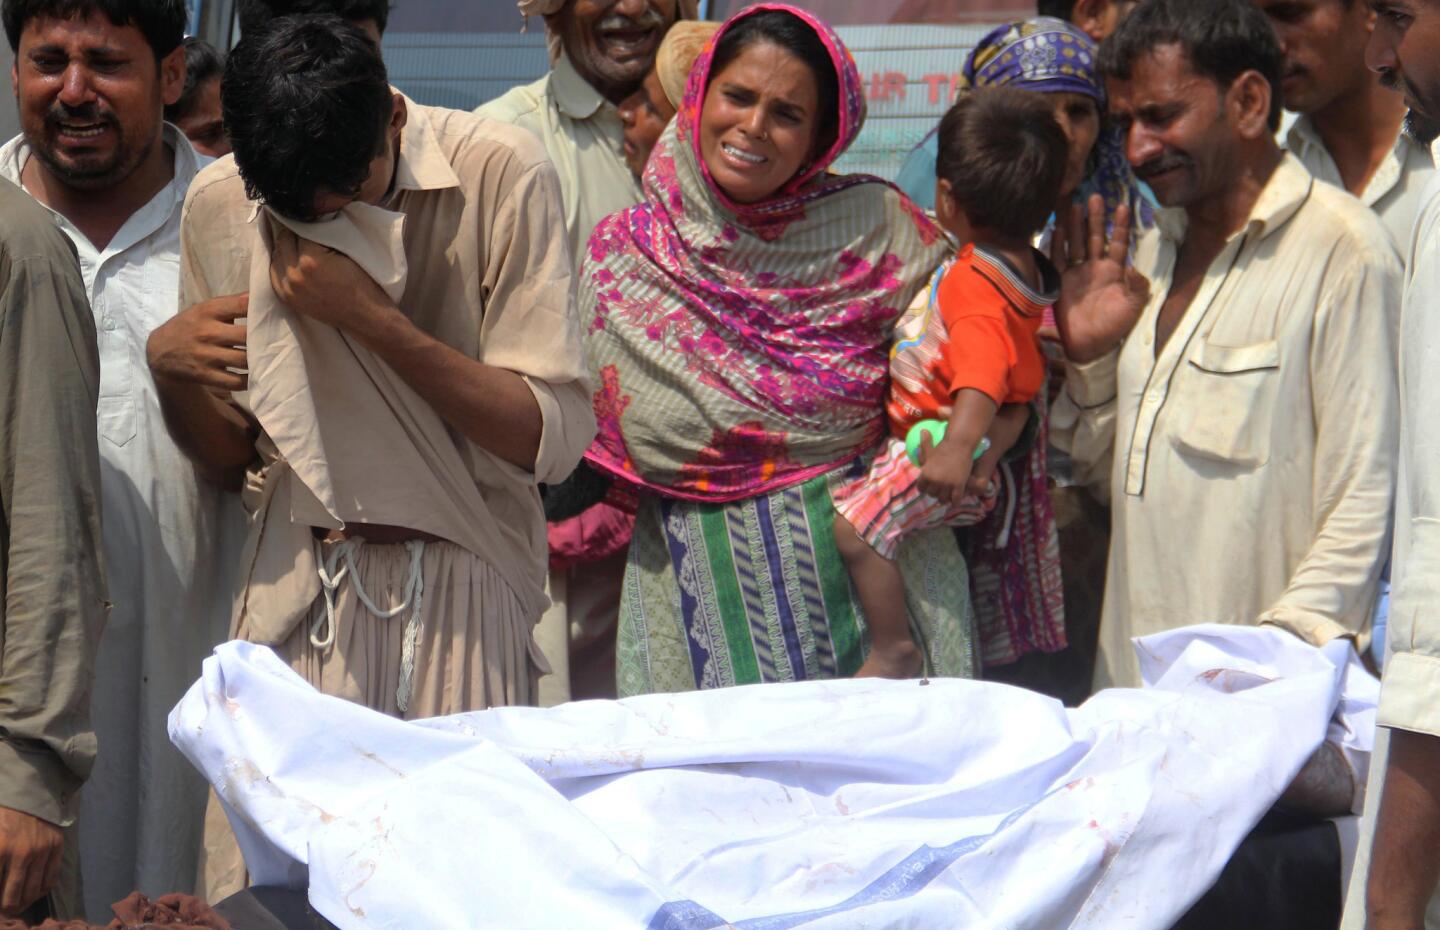 Relatives weep over a body at a hospital in Bahawalpur, Pakistan, after the oil truck fire.